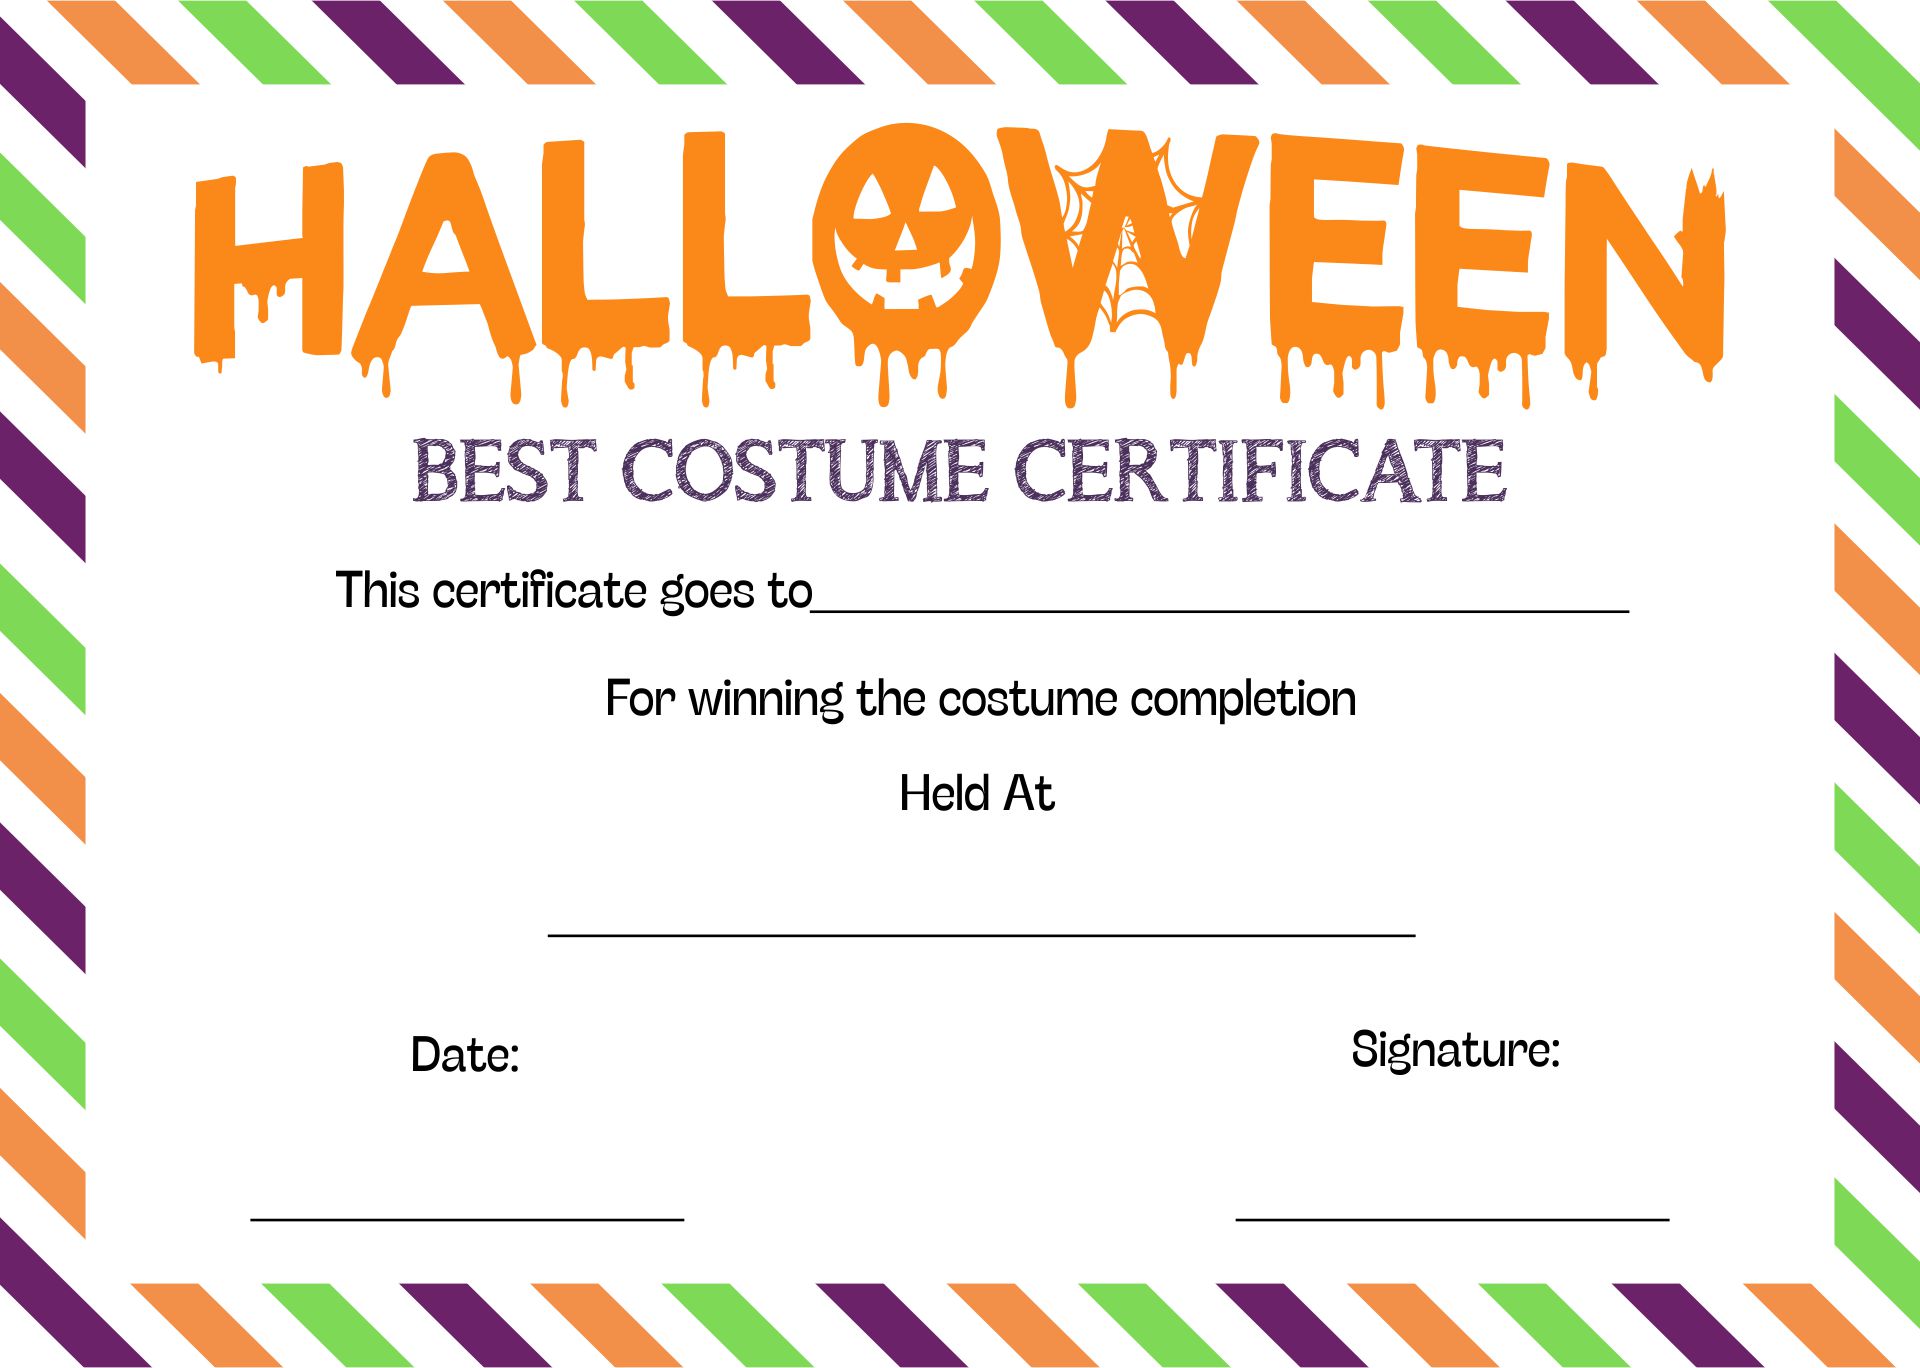 Awards For Halloween Costume Contest